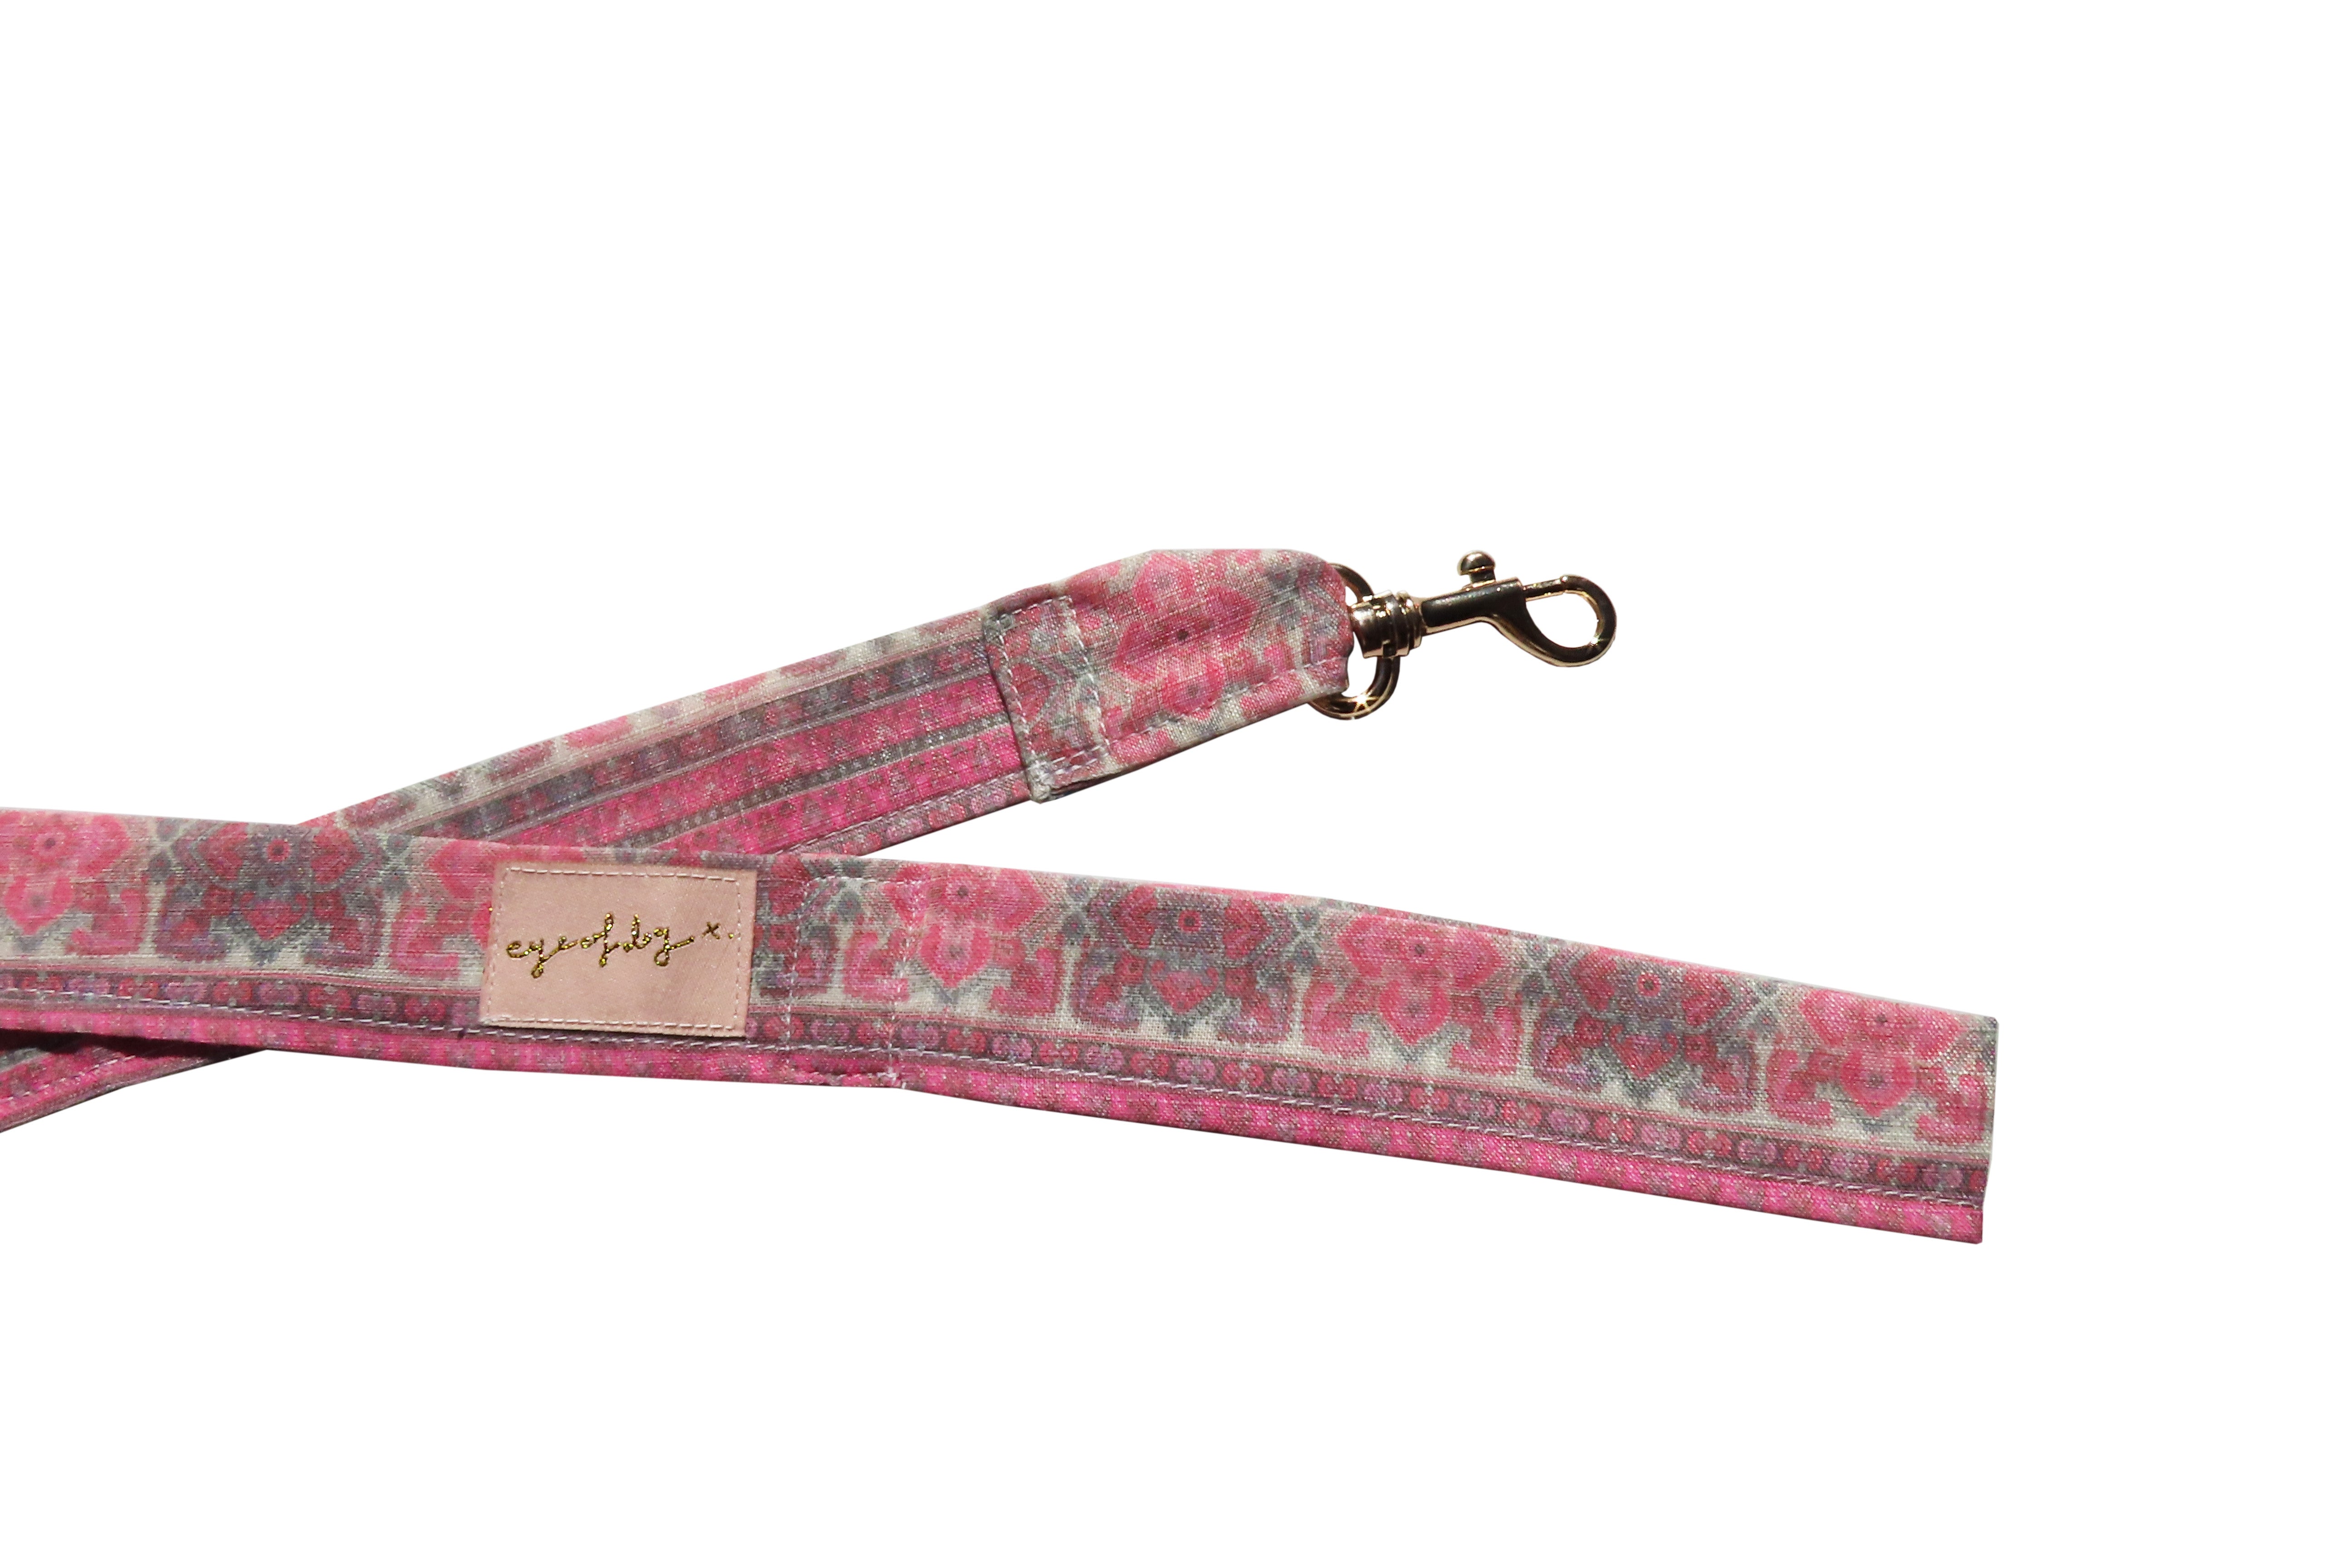 CareFREE Dog Lead- Gold or Silver.